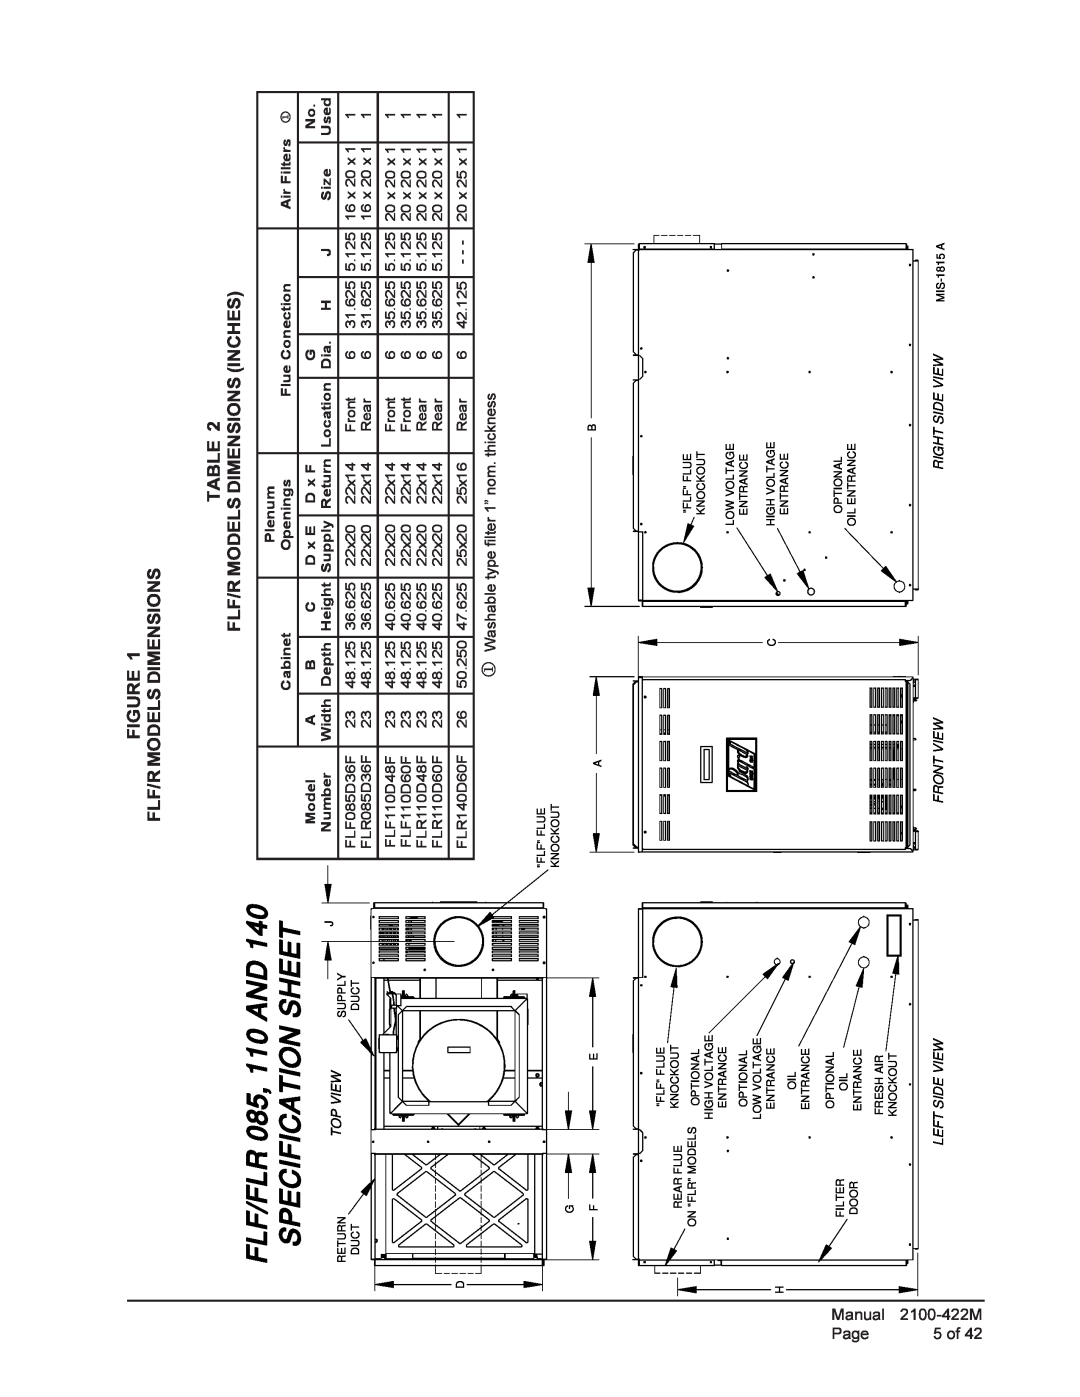 Bard FLF110D48F FLF/FLR 085, 110 AND 140 SPECIFICATION SHEET, Figure Flf/R Models Dimensions Table, Top View, Front View 